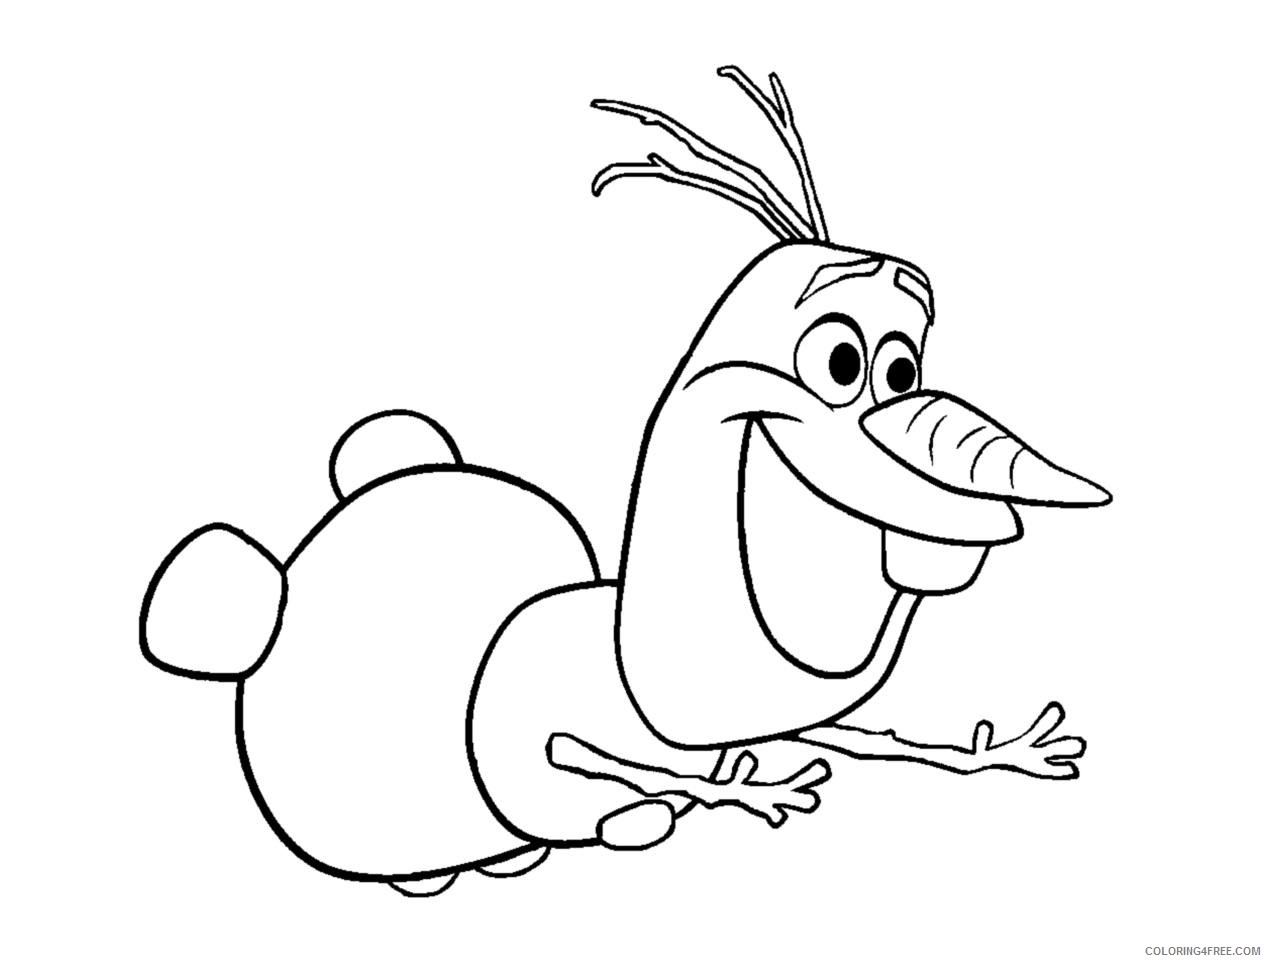 olaf flying coloring pages Coloring4free